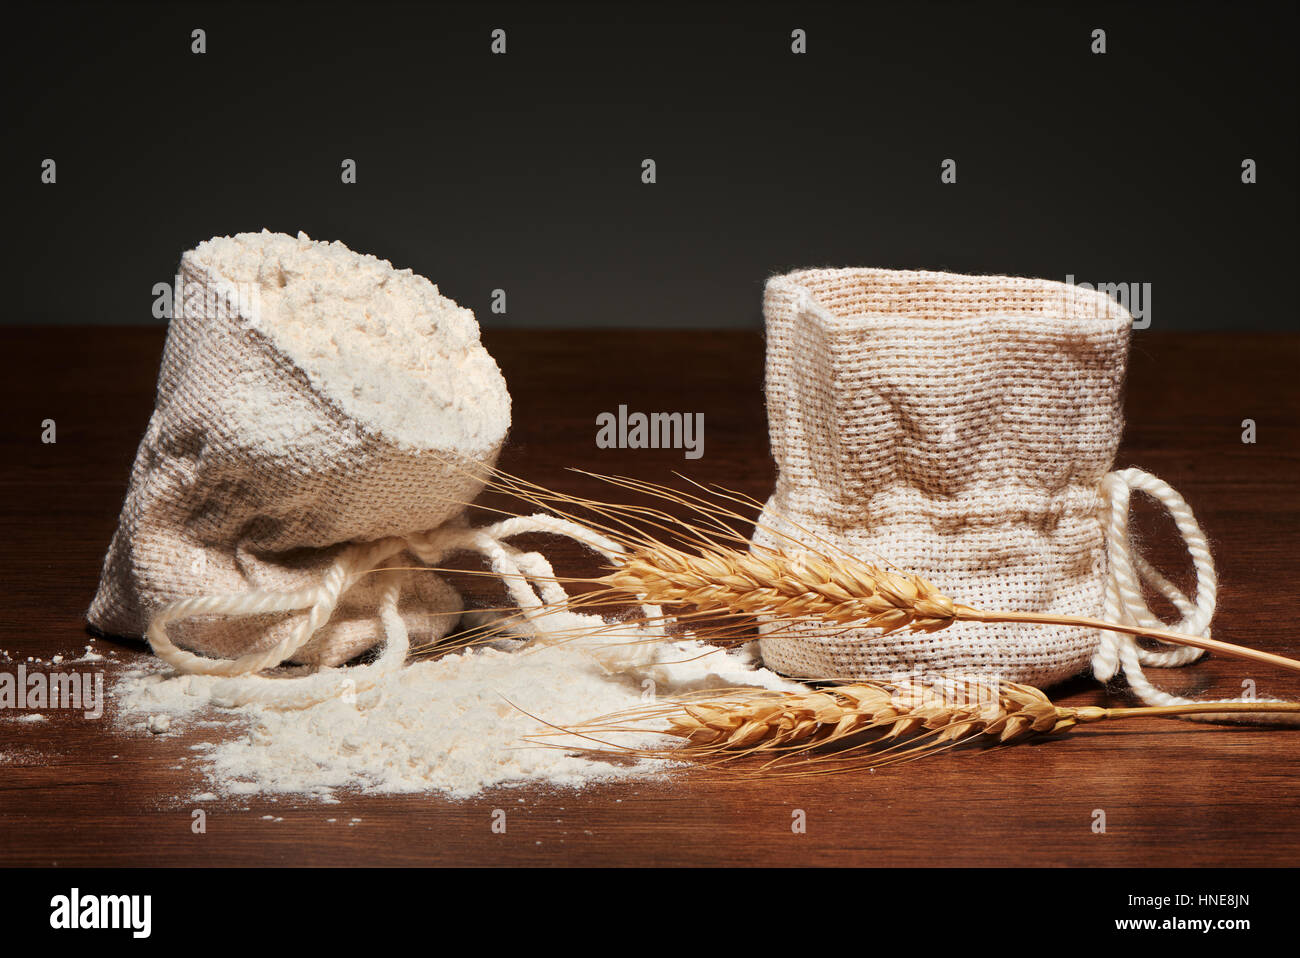 Burlap bag of flour, empty burlap bag and wheat ears on dark wooden table on grey background Stock Photo